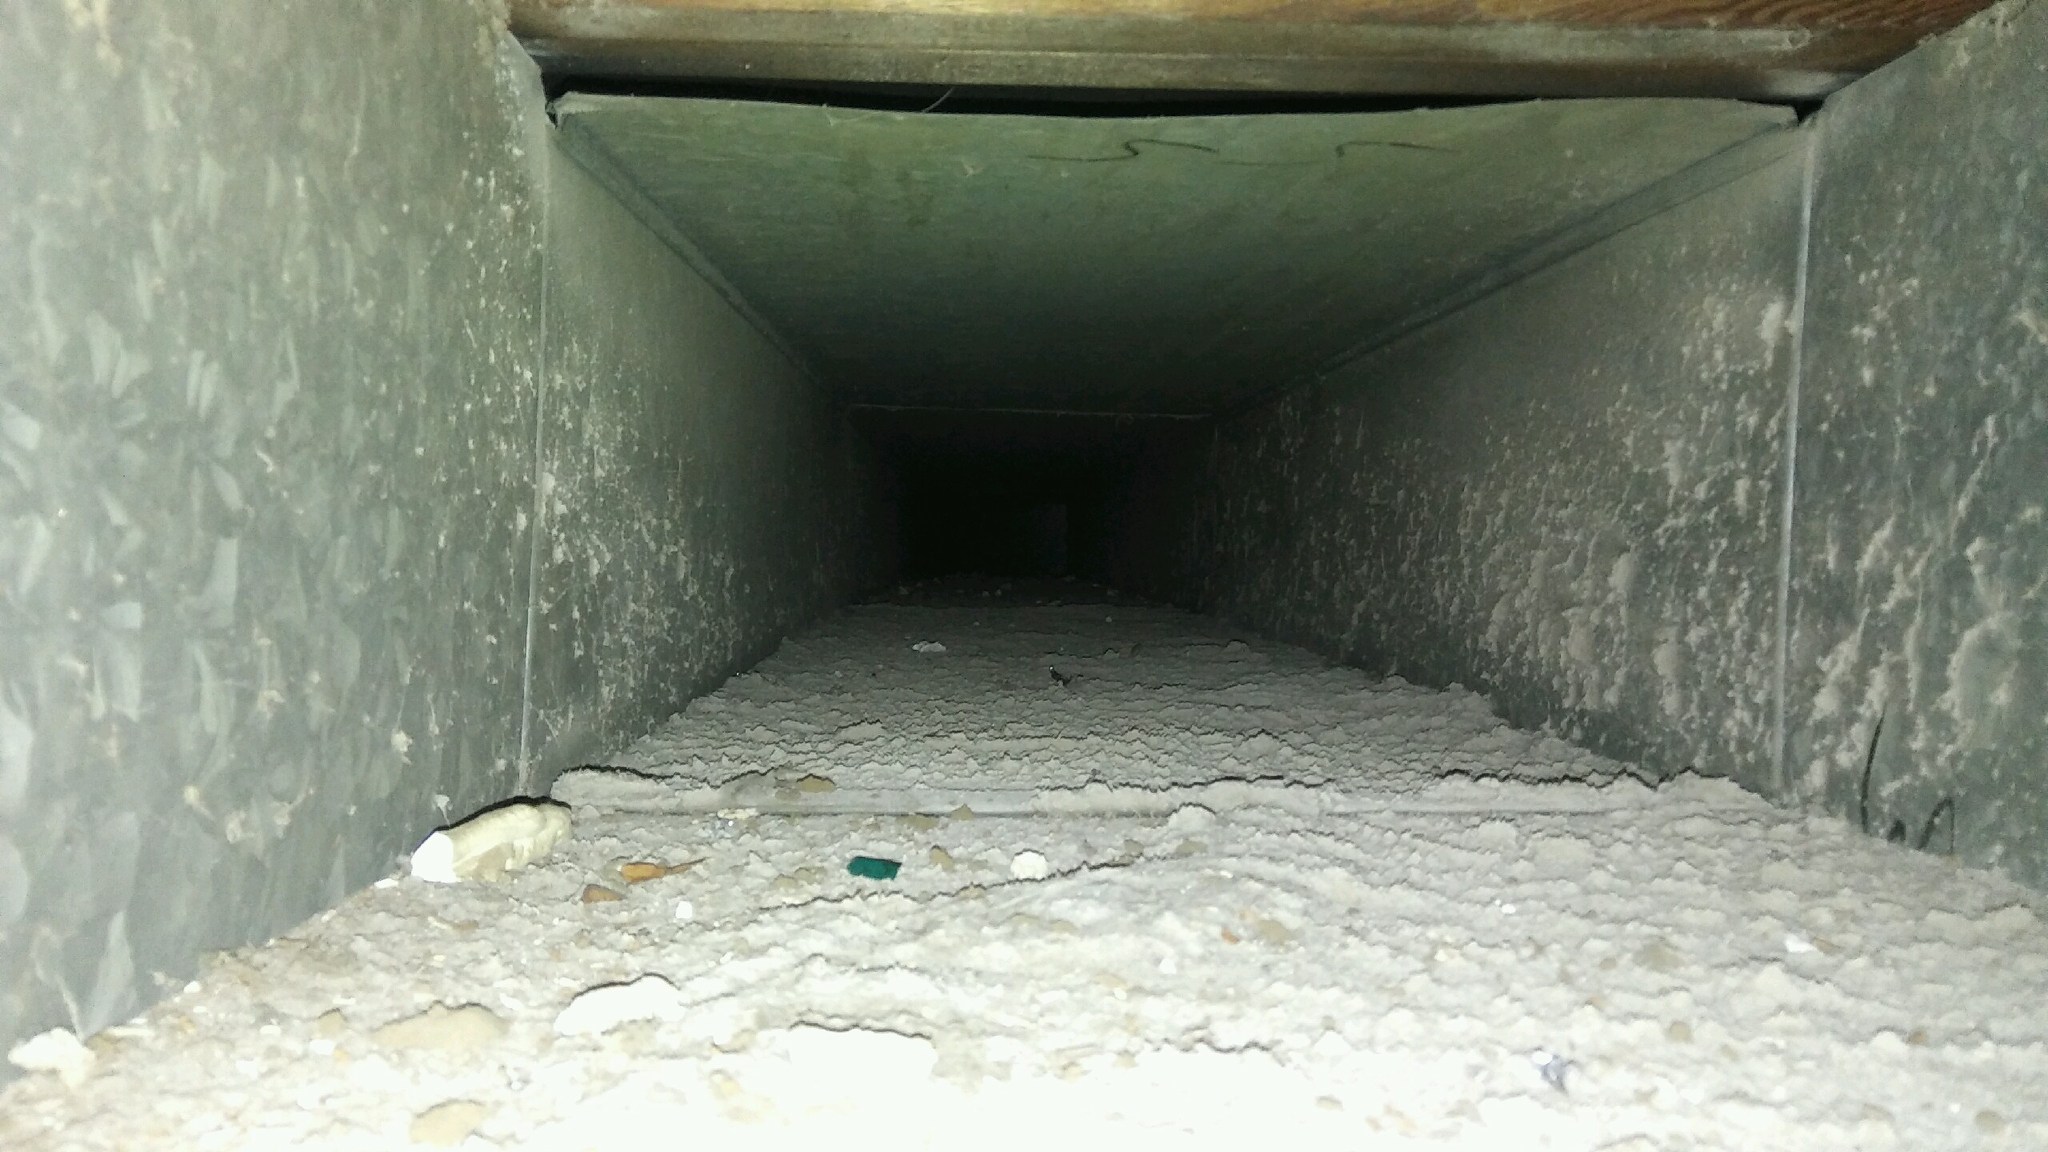 After Air Duct Cleaning - Shelby Township, MI